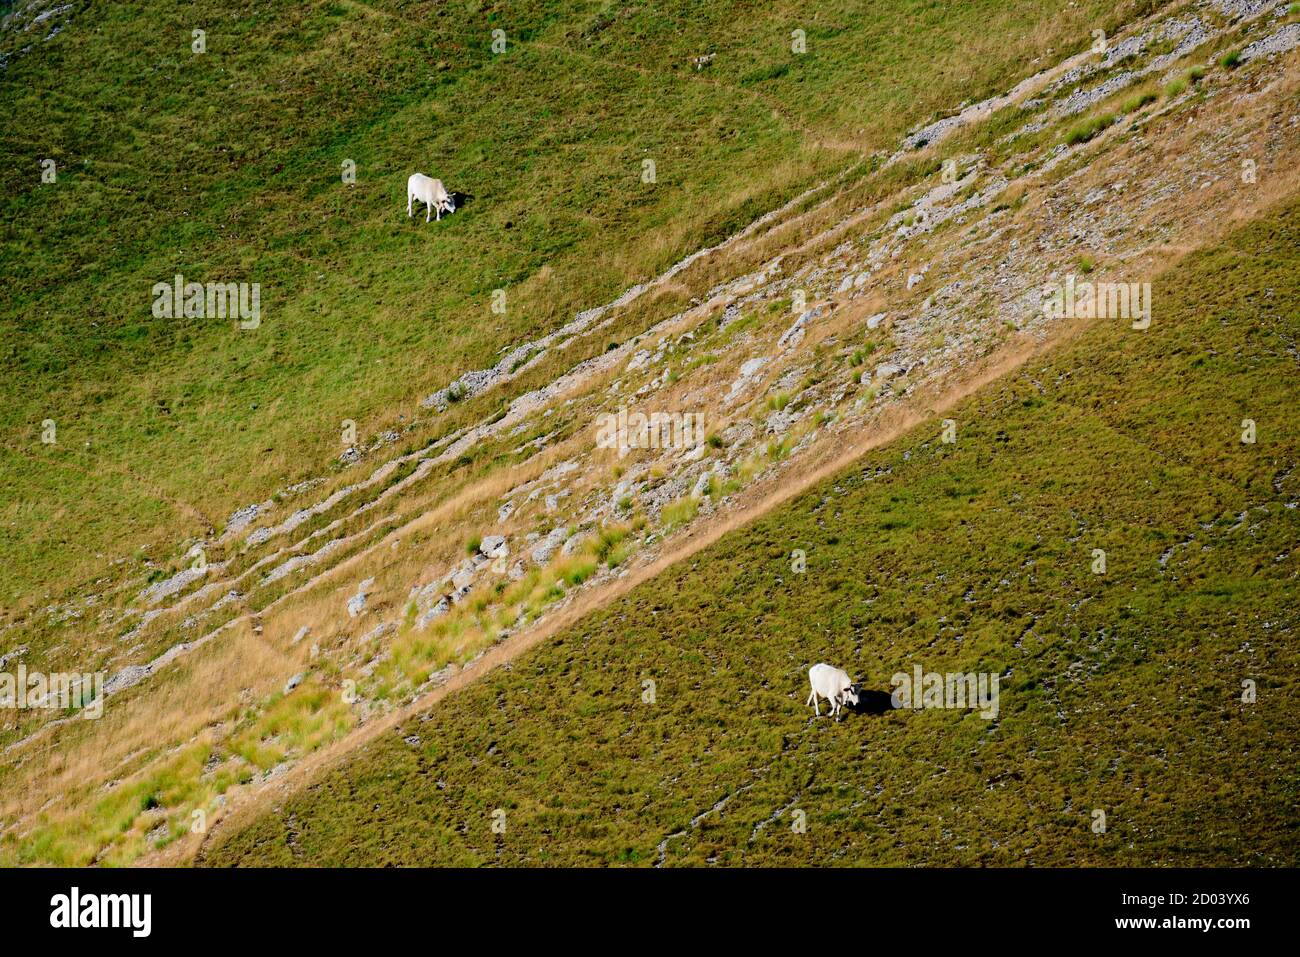 Cows walking on a meadow separated by a line of stones Stock Photo